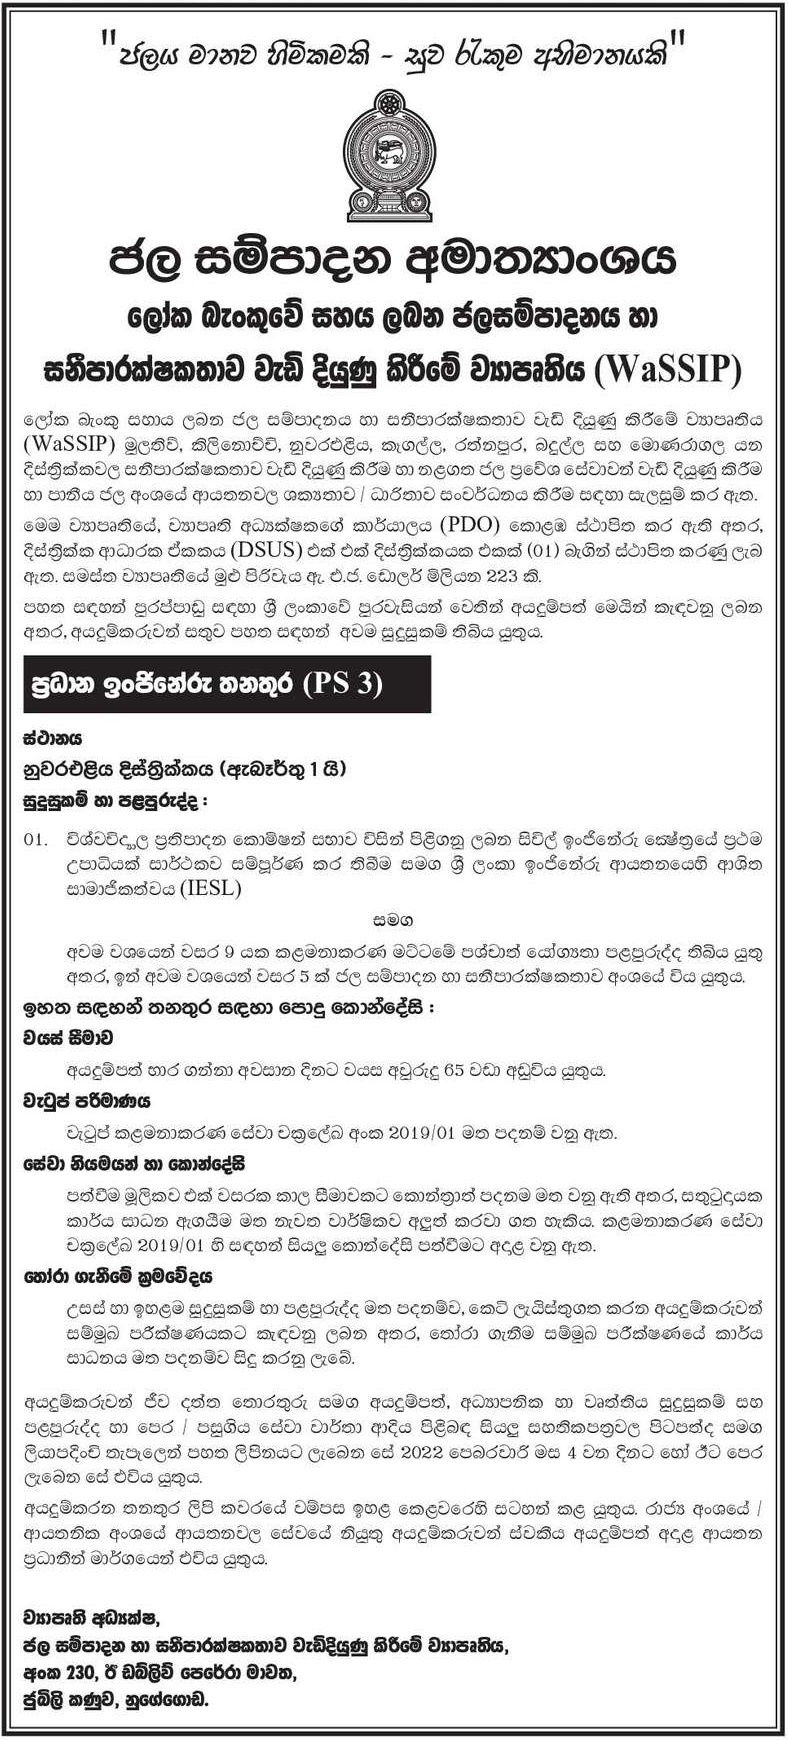 Chief Engineer - Ministry of Water Supply 